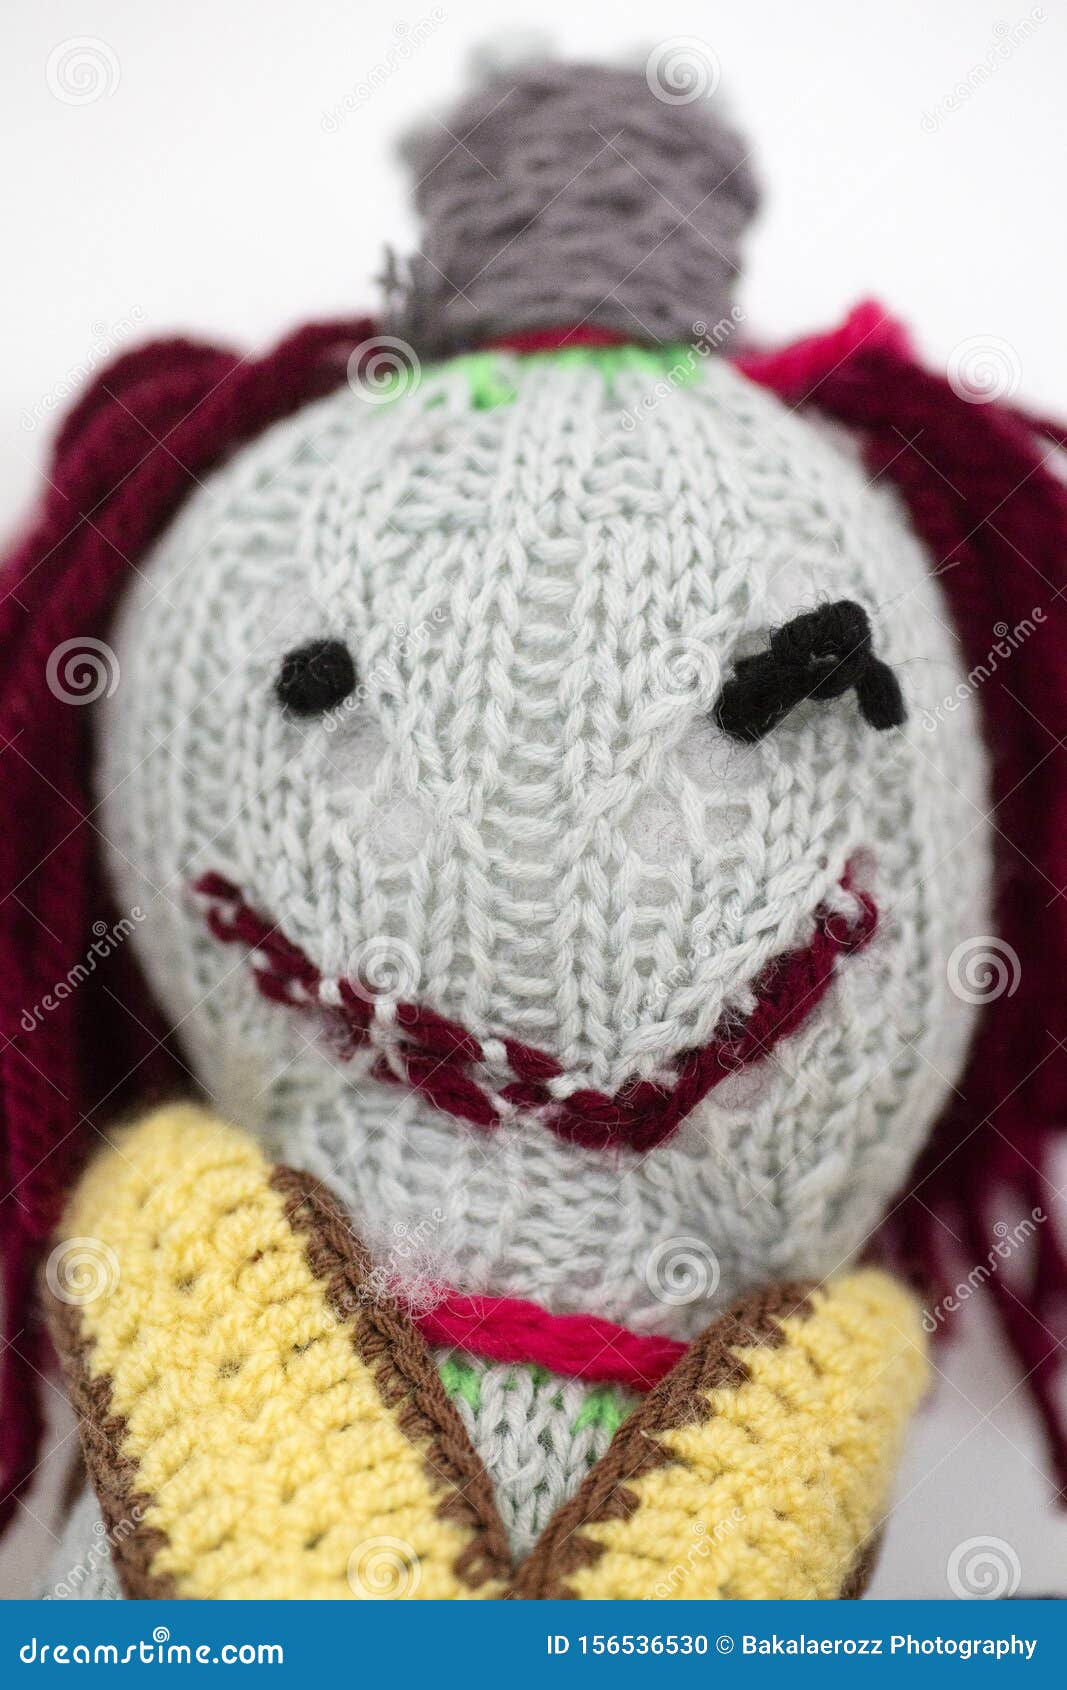 scary human toy puppet face fifty megapixels handmade decor